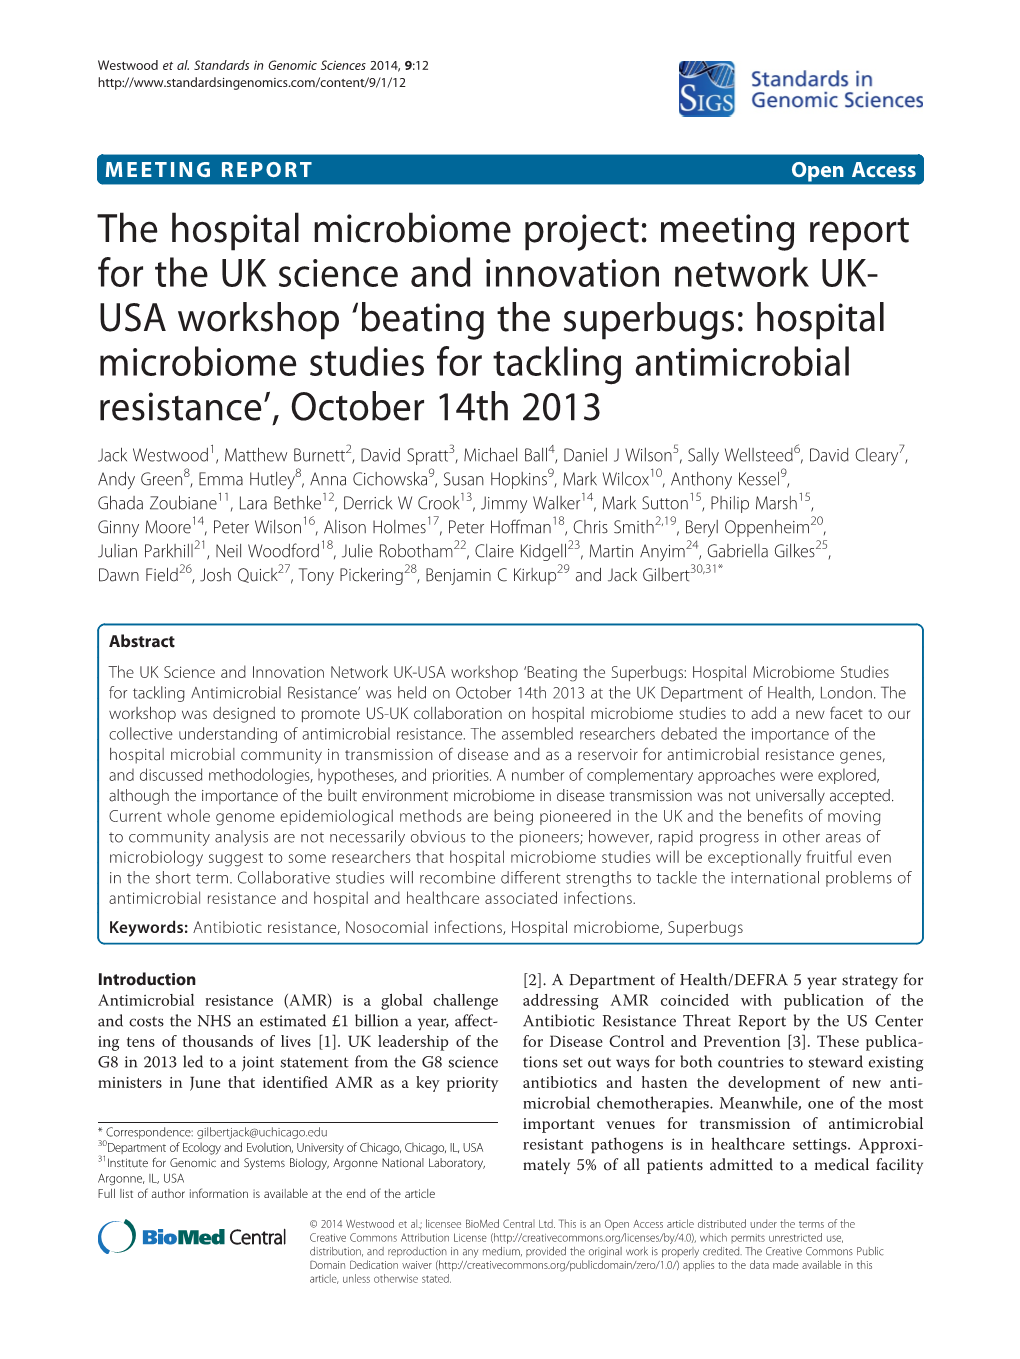 The Hospital Microbiome Project